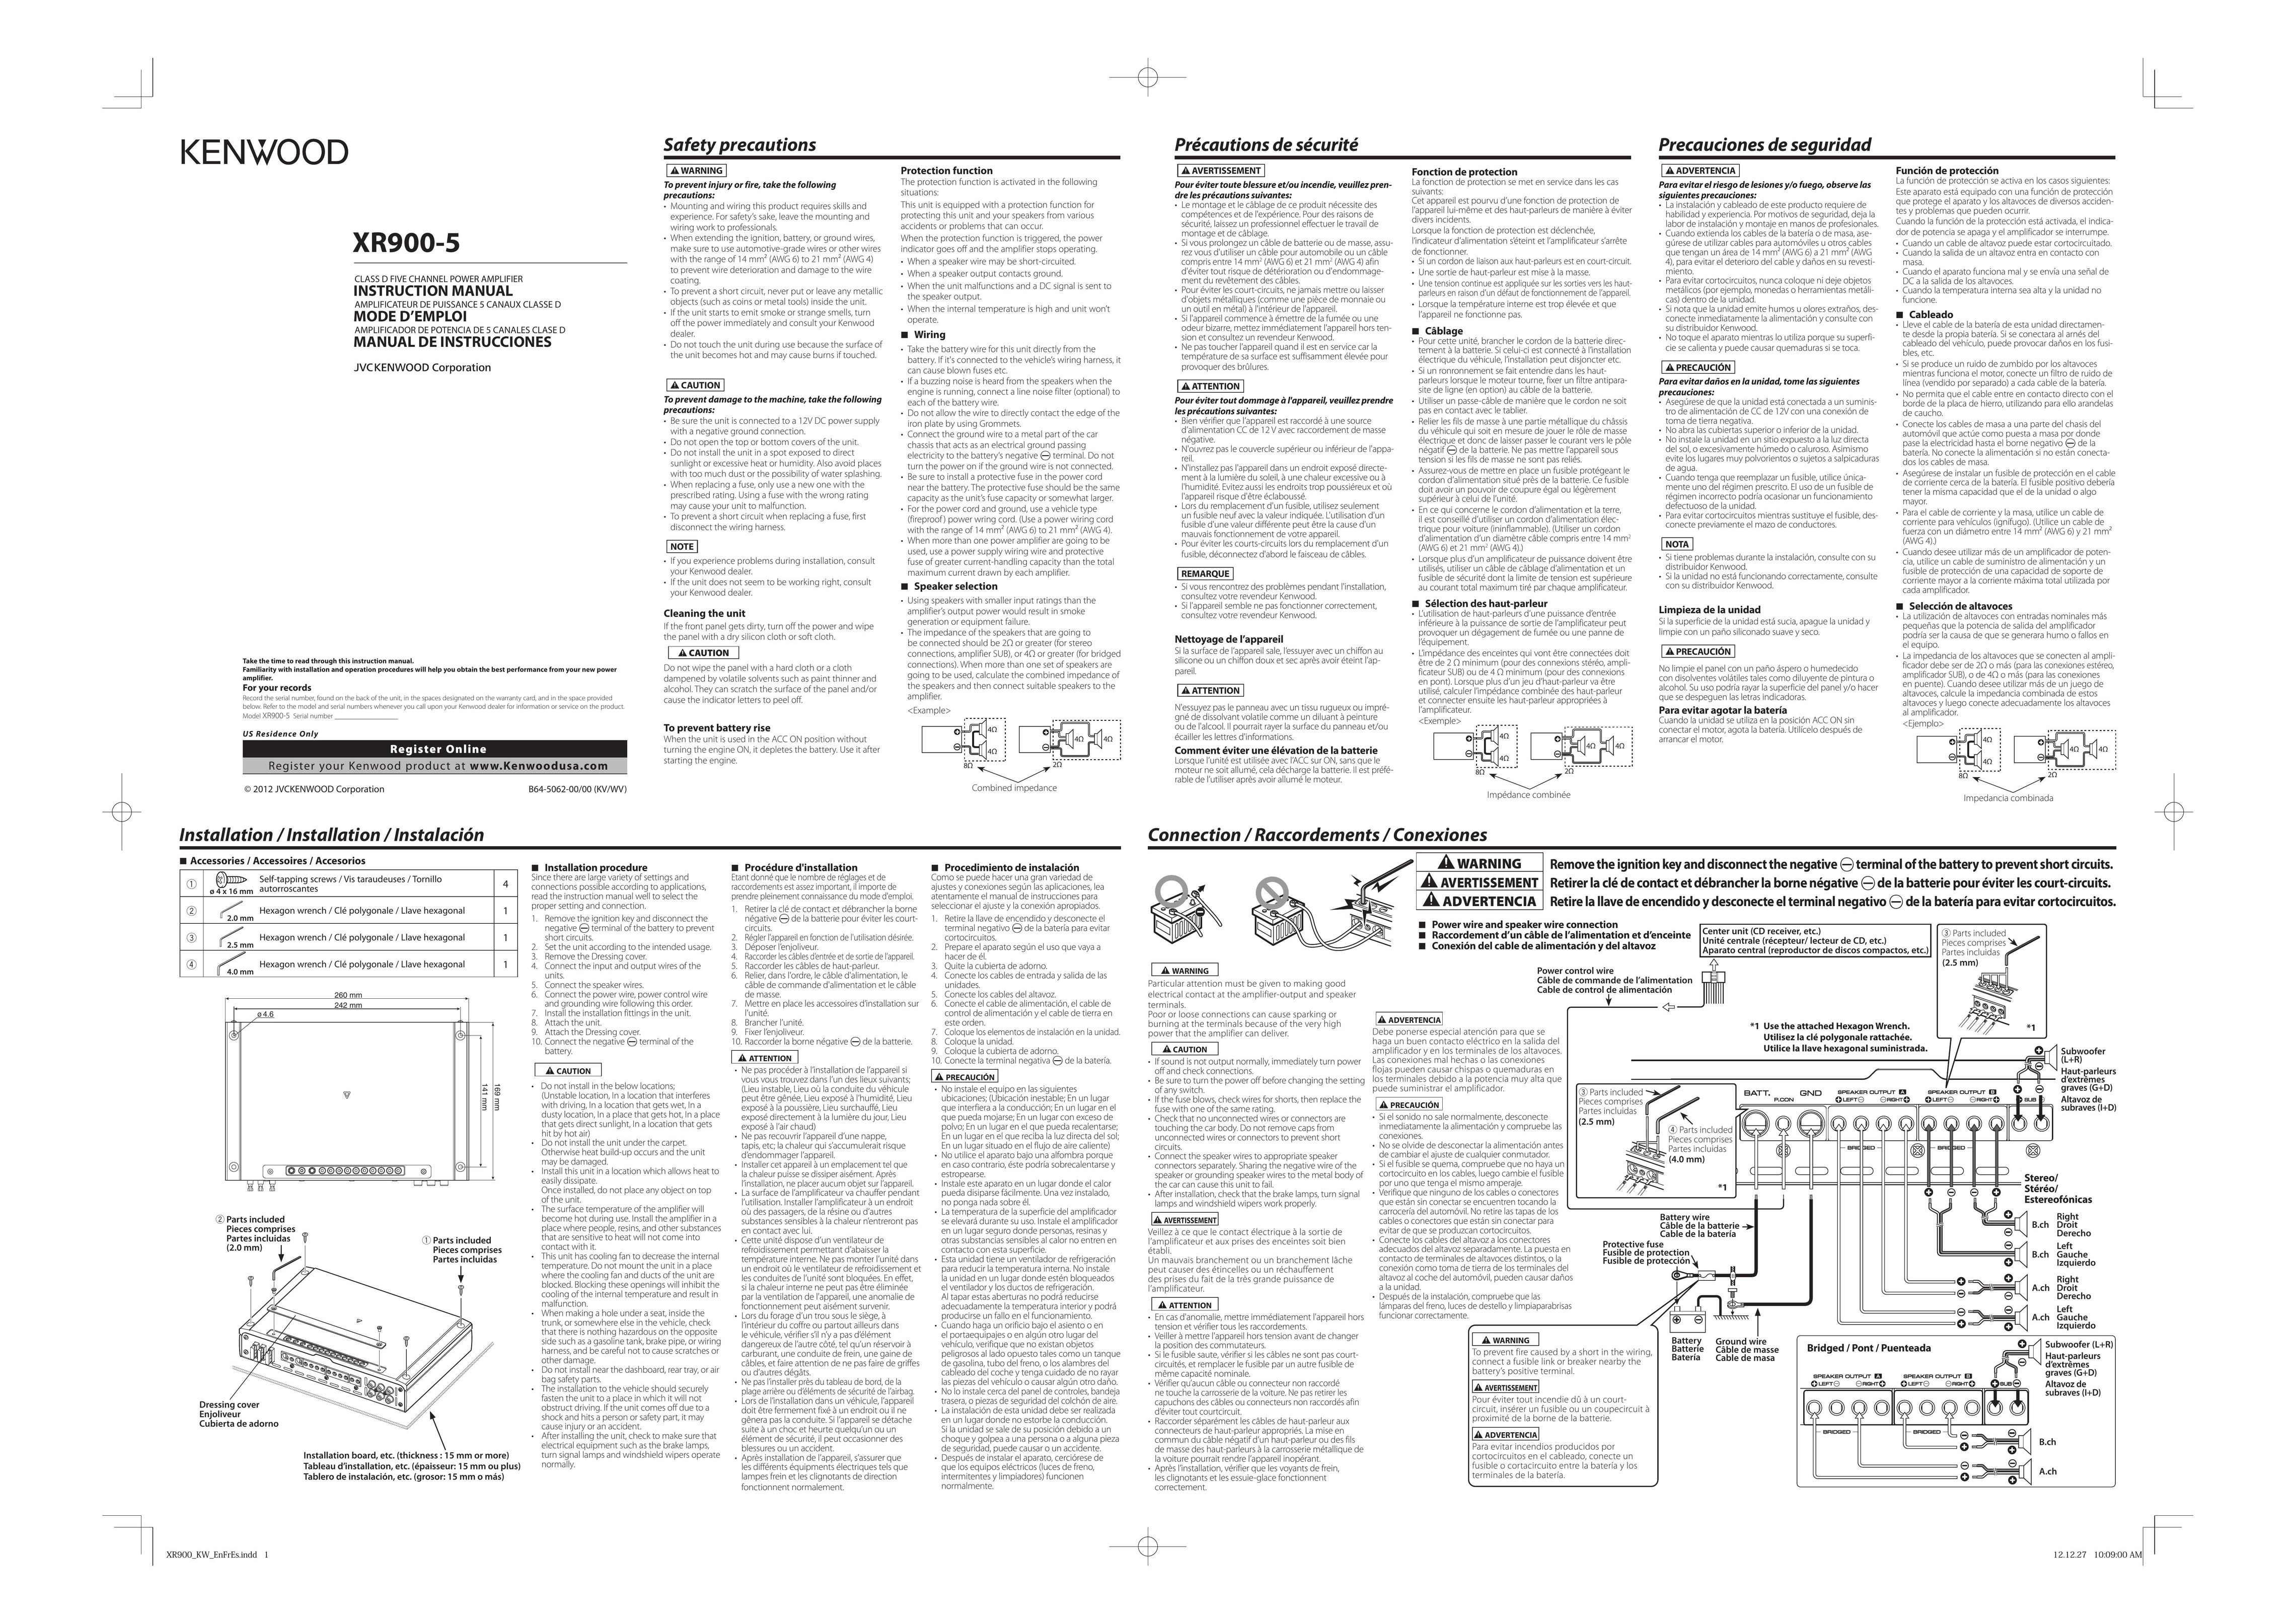 Kenwood XR900-5 Home Theater System User Manual